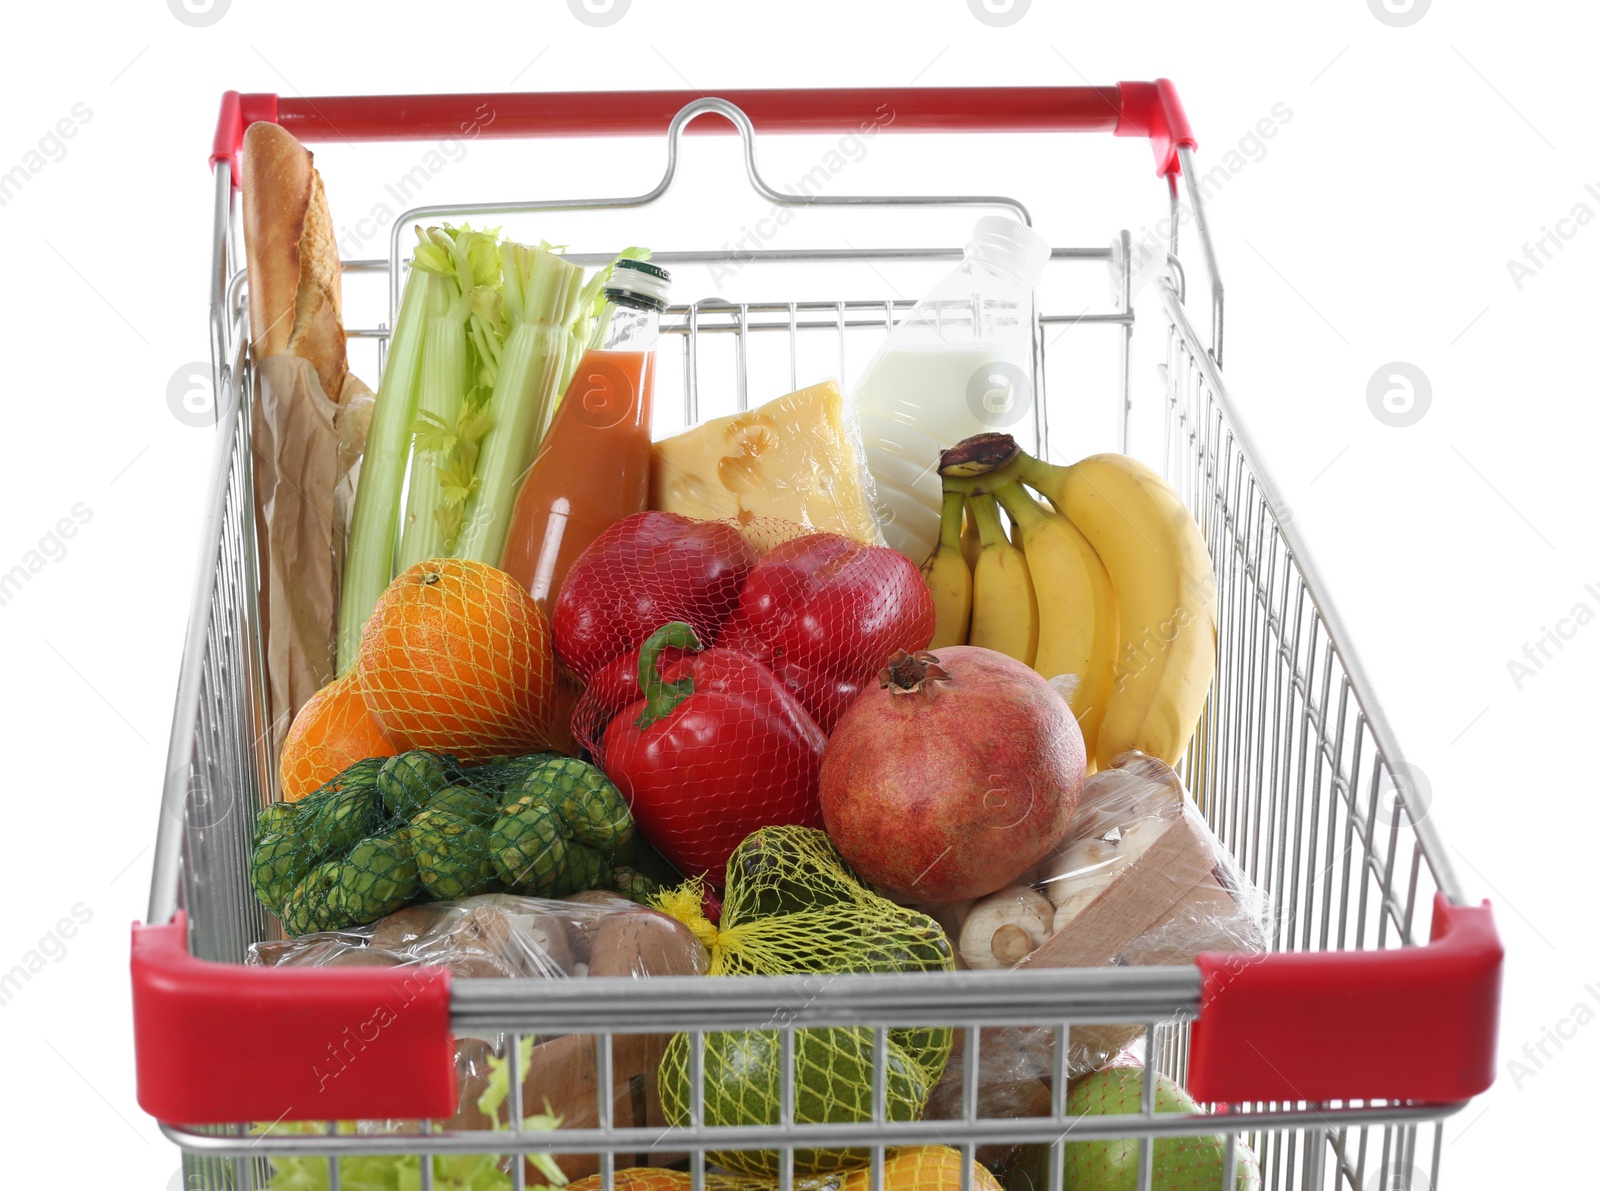 Photo of Shopping cart with fresh groceries on white background